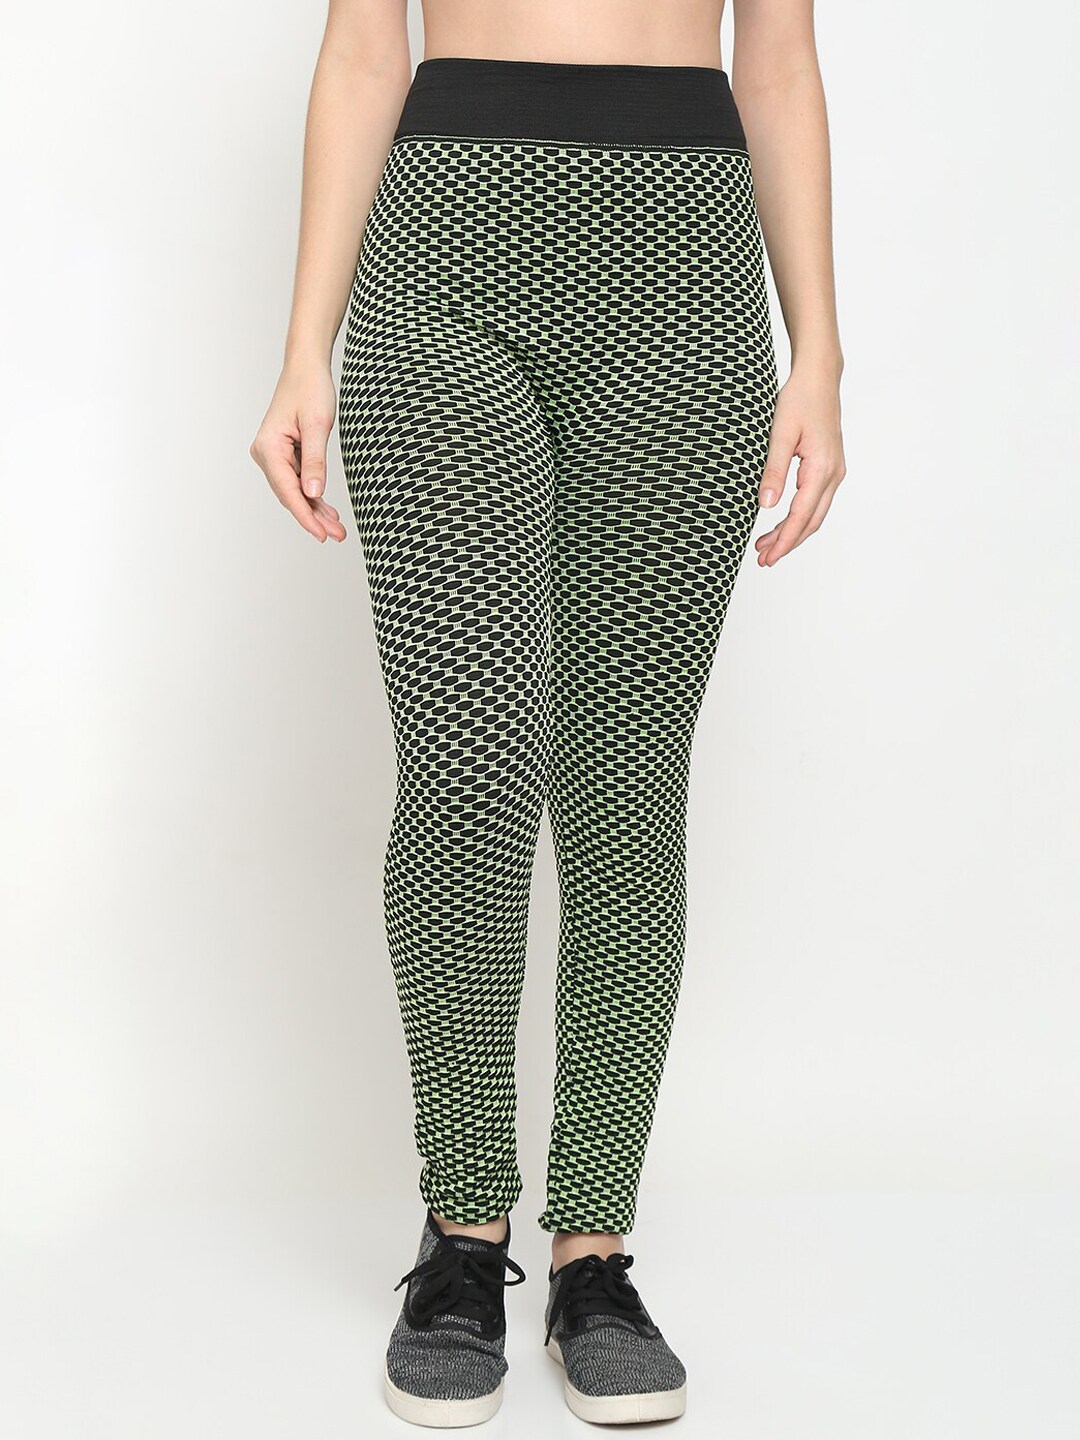 GRACIT Women Green Printed Tights Price in India